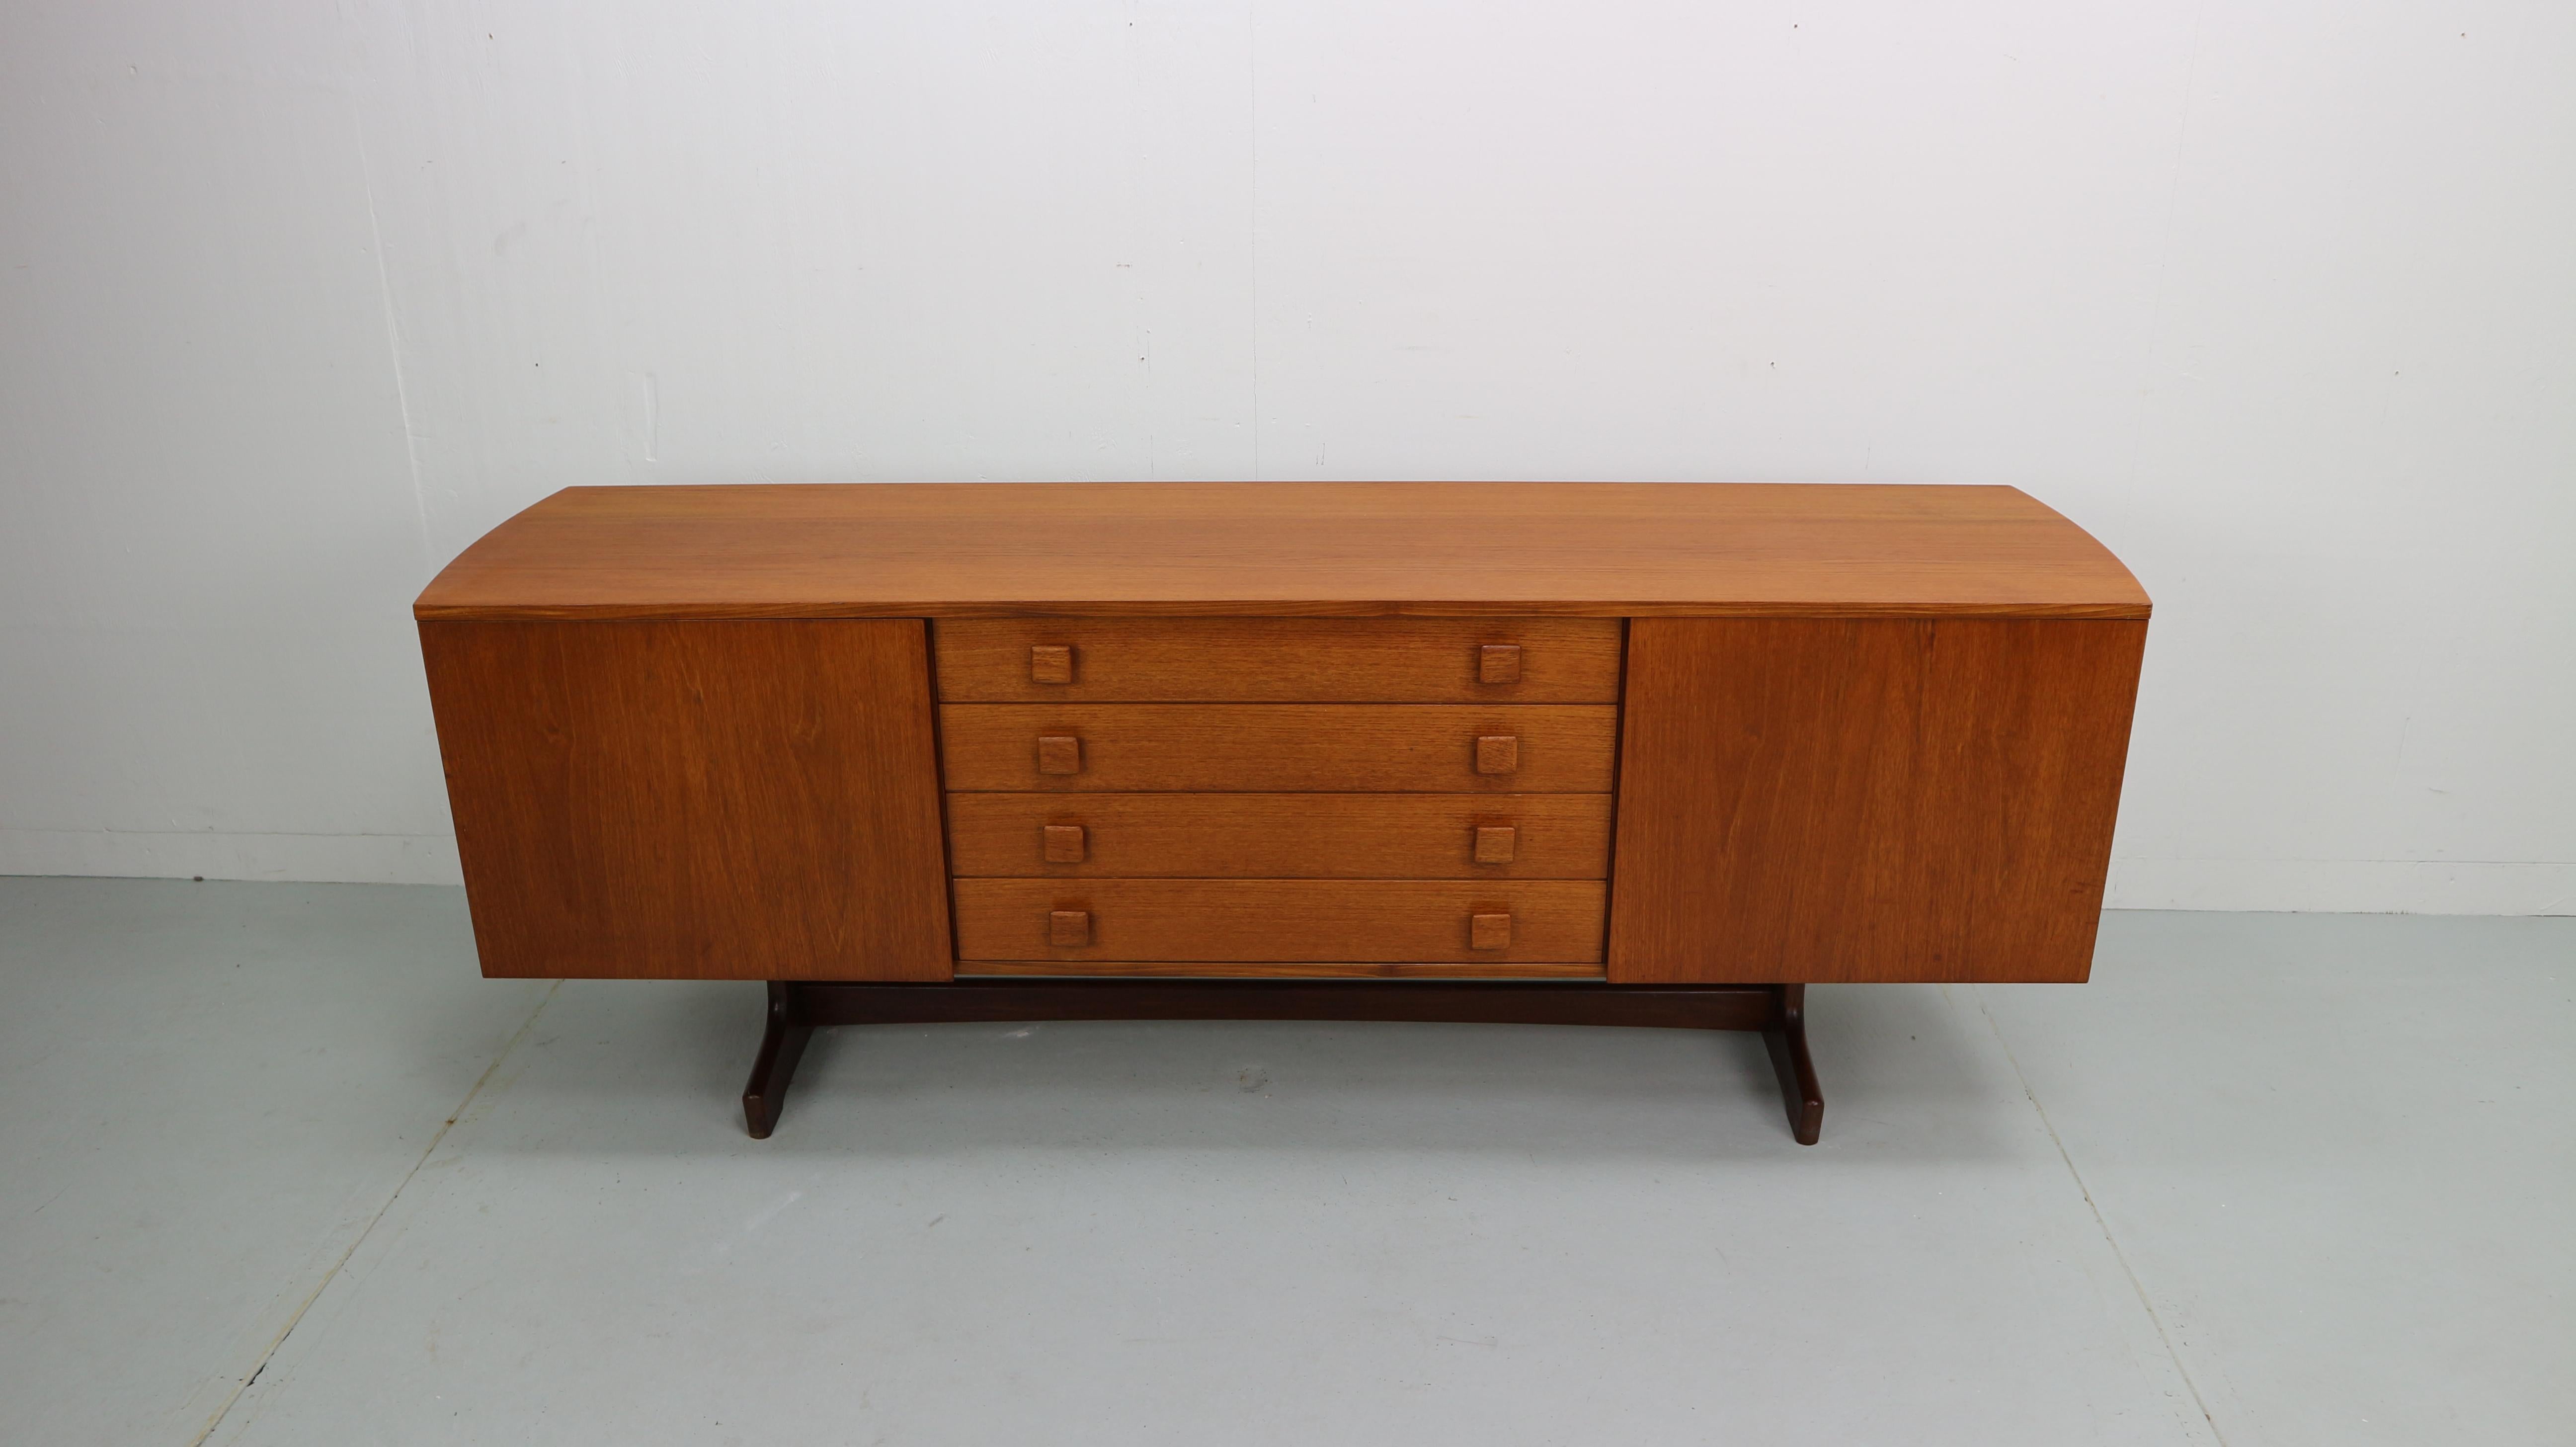 Midcentury sideboard with curves sides in teak wood. Four drawers and 2 doors with shelf's behind it. Refurbished and refinished in hardwax.